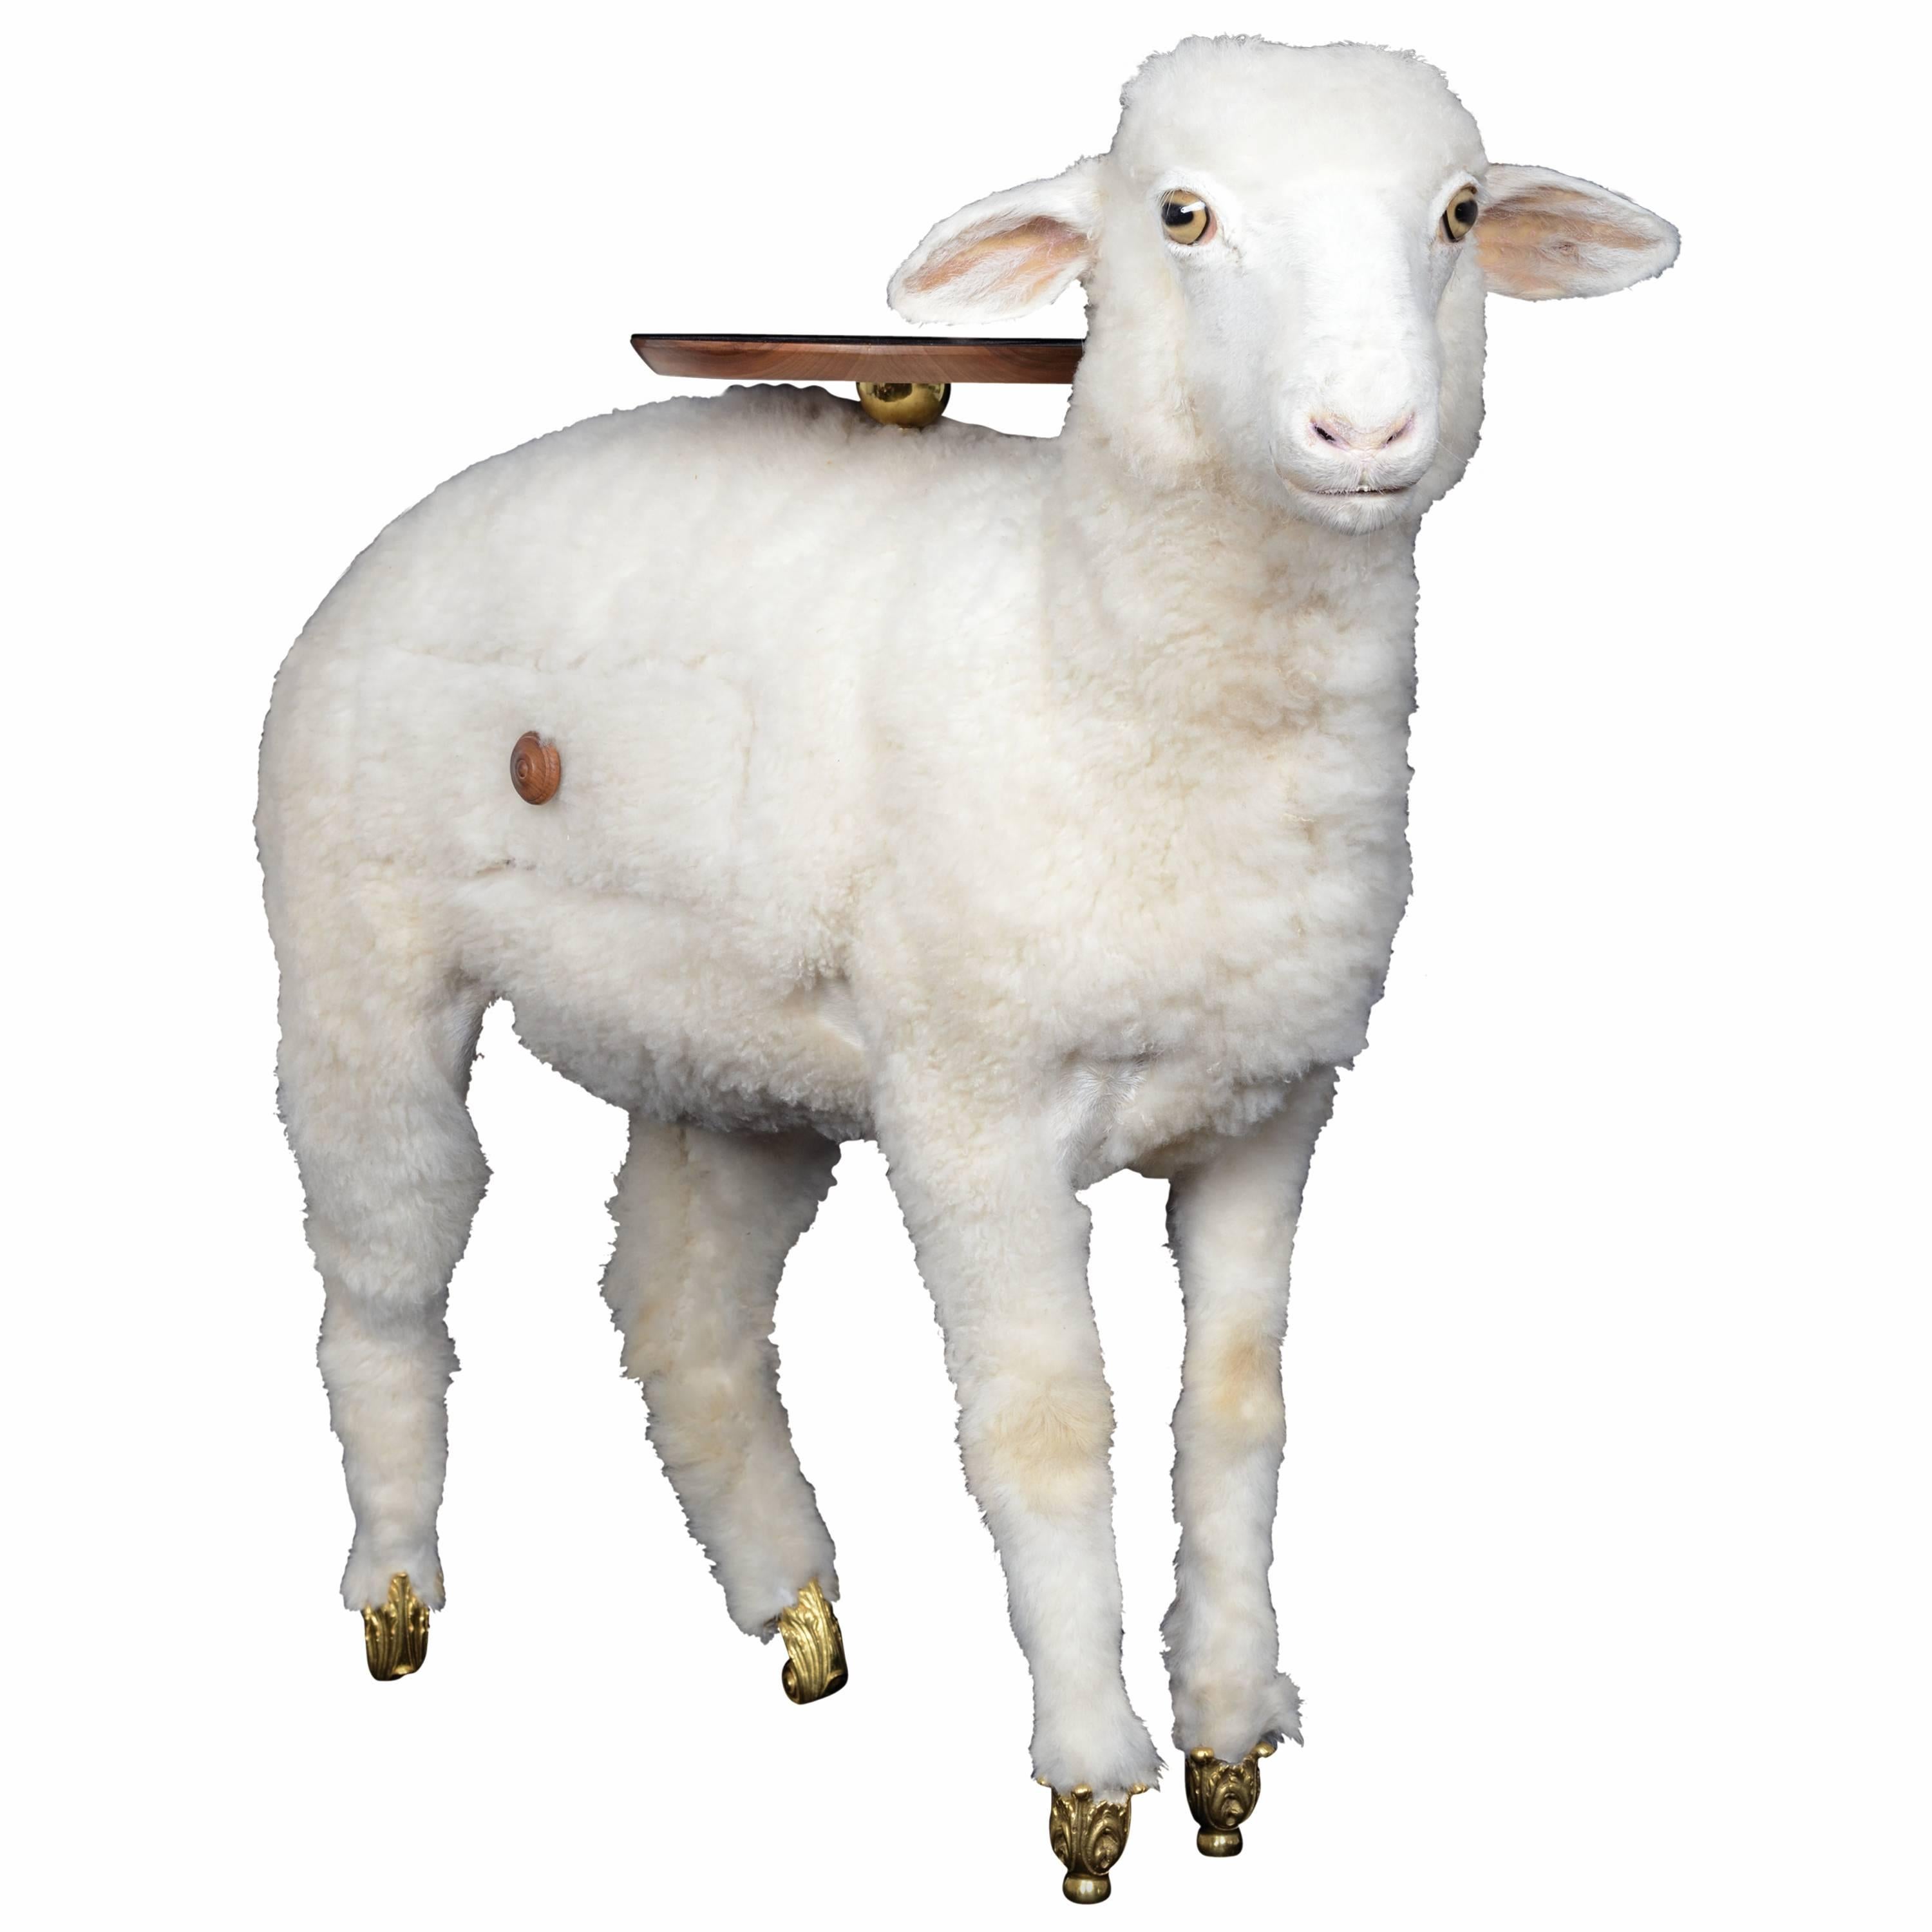 XAI Limited Edition Lambs by BD Barcelona and Gala Salvador Dalí Foundation